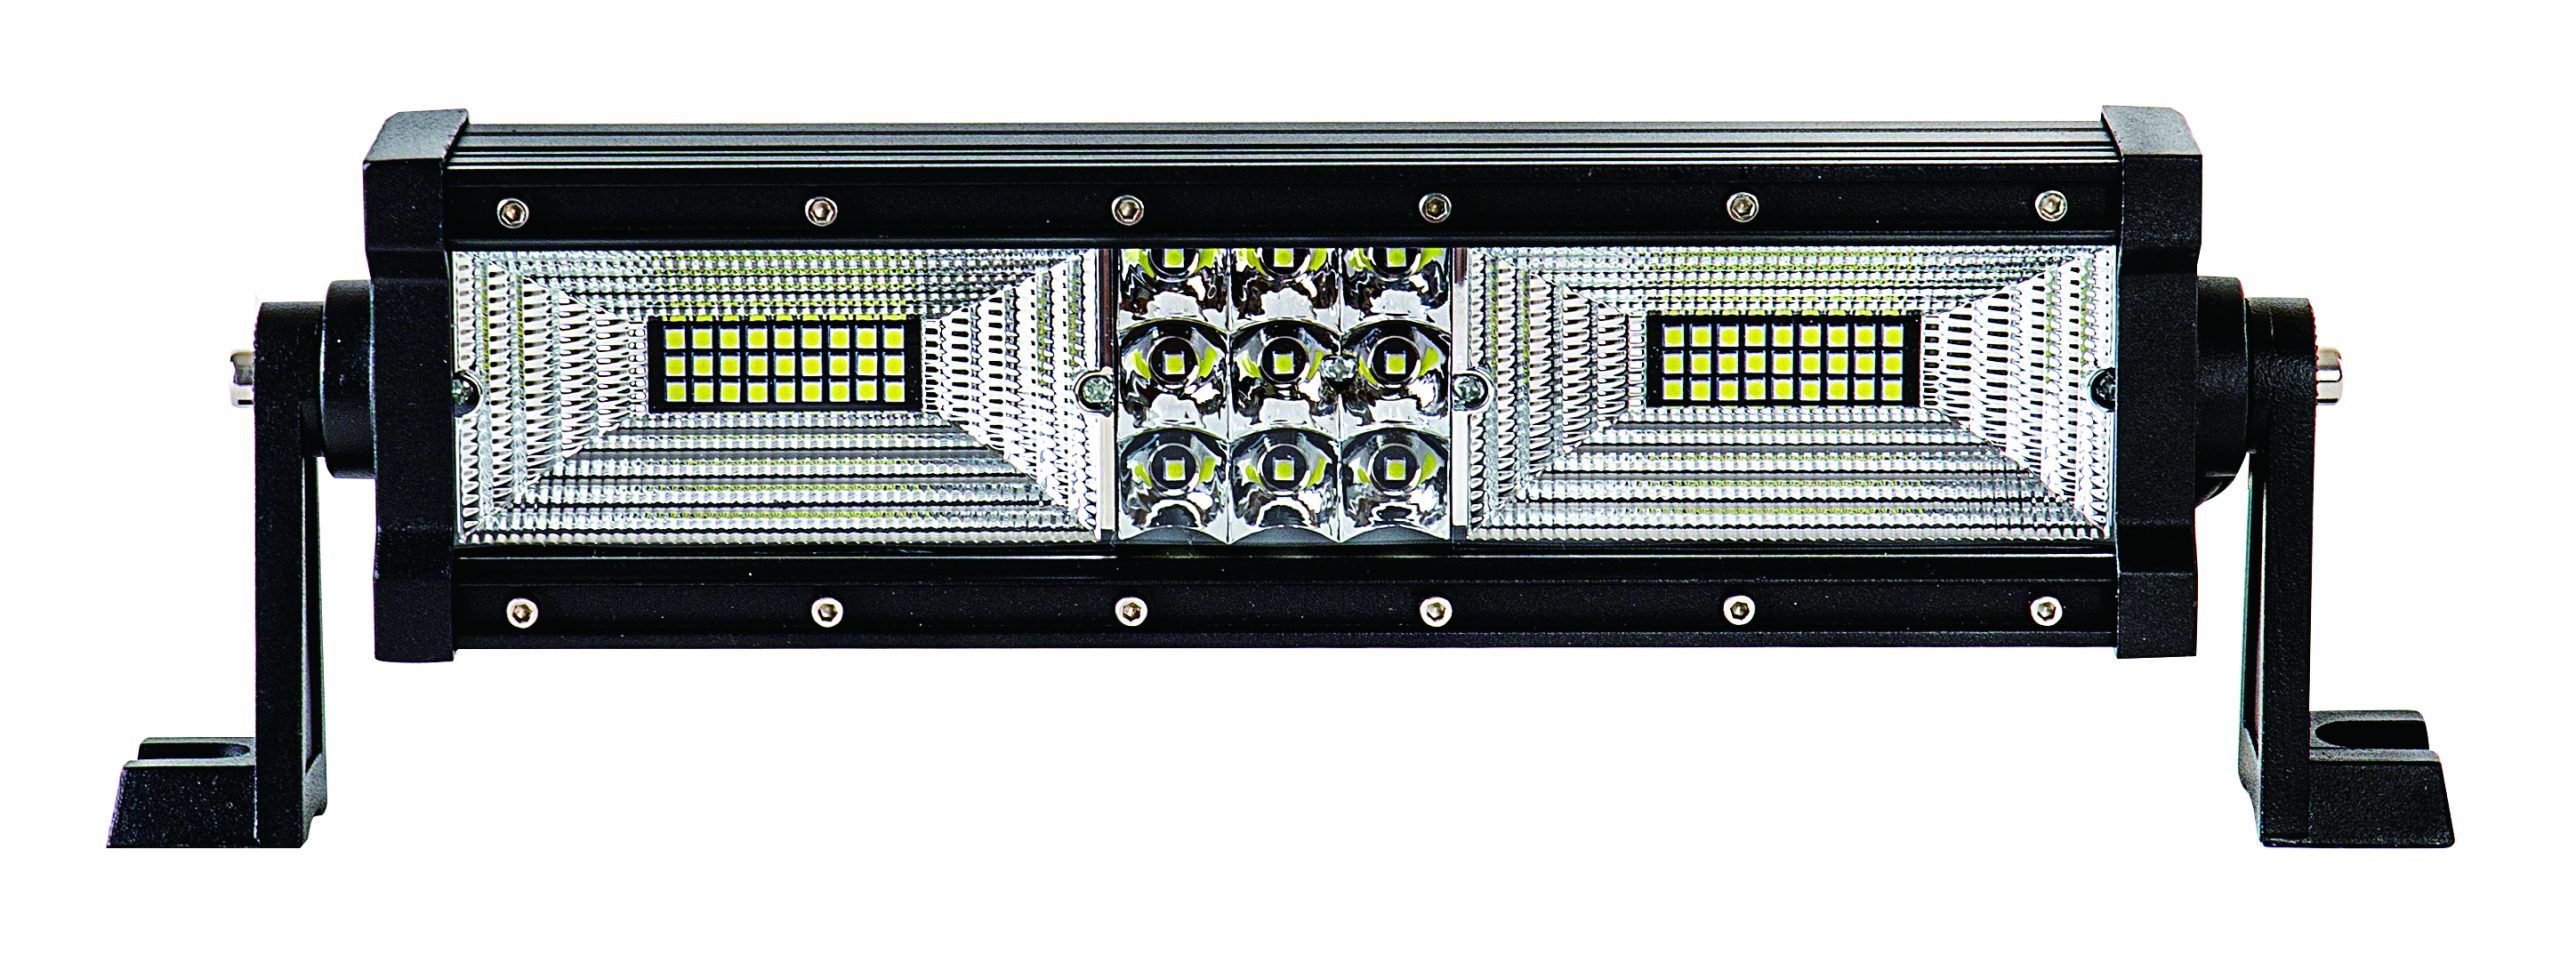 Pproiector led 189W, 13770LM, 6000K, combo